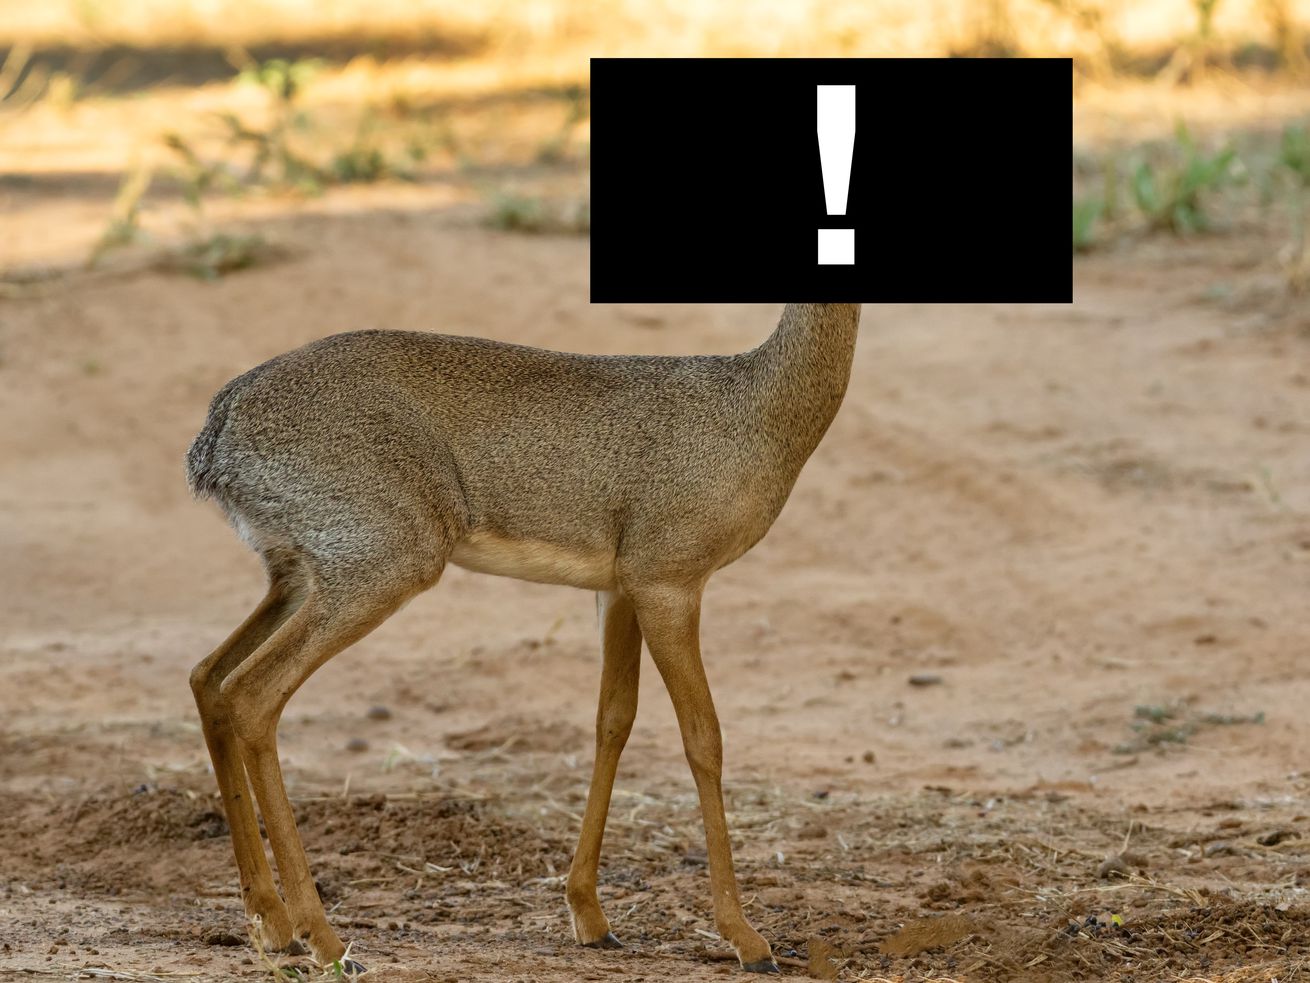 A picture of a small antelope with a black box and an exclamation point superimposed over its head.